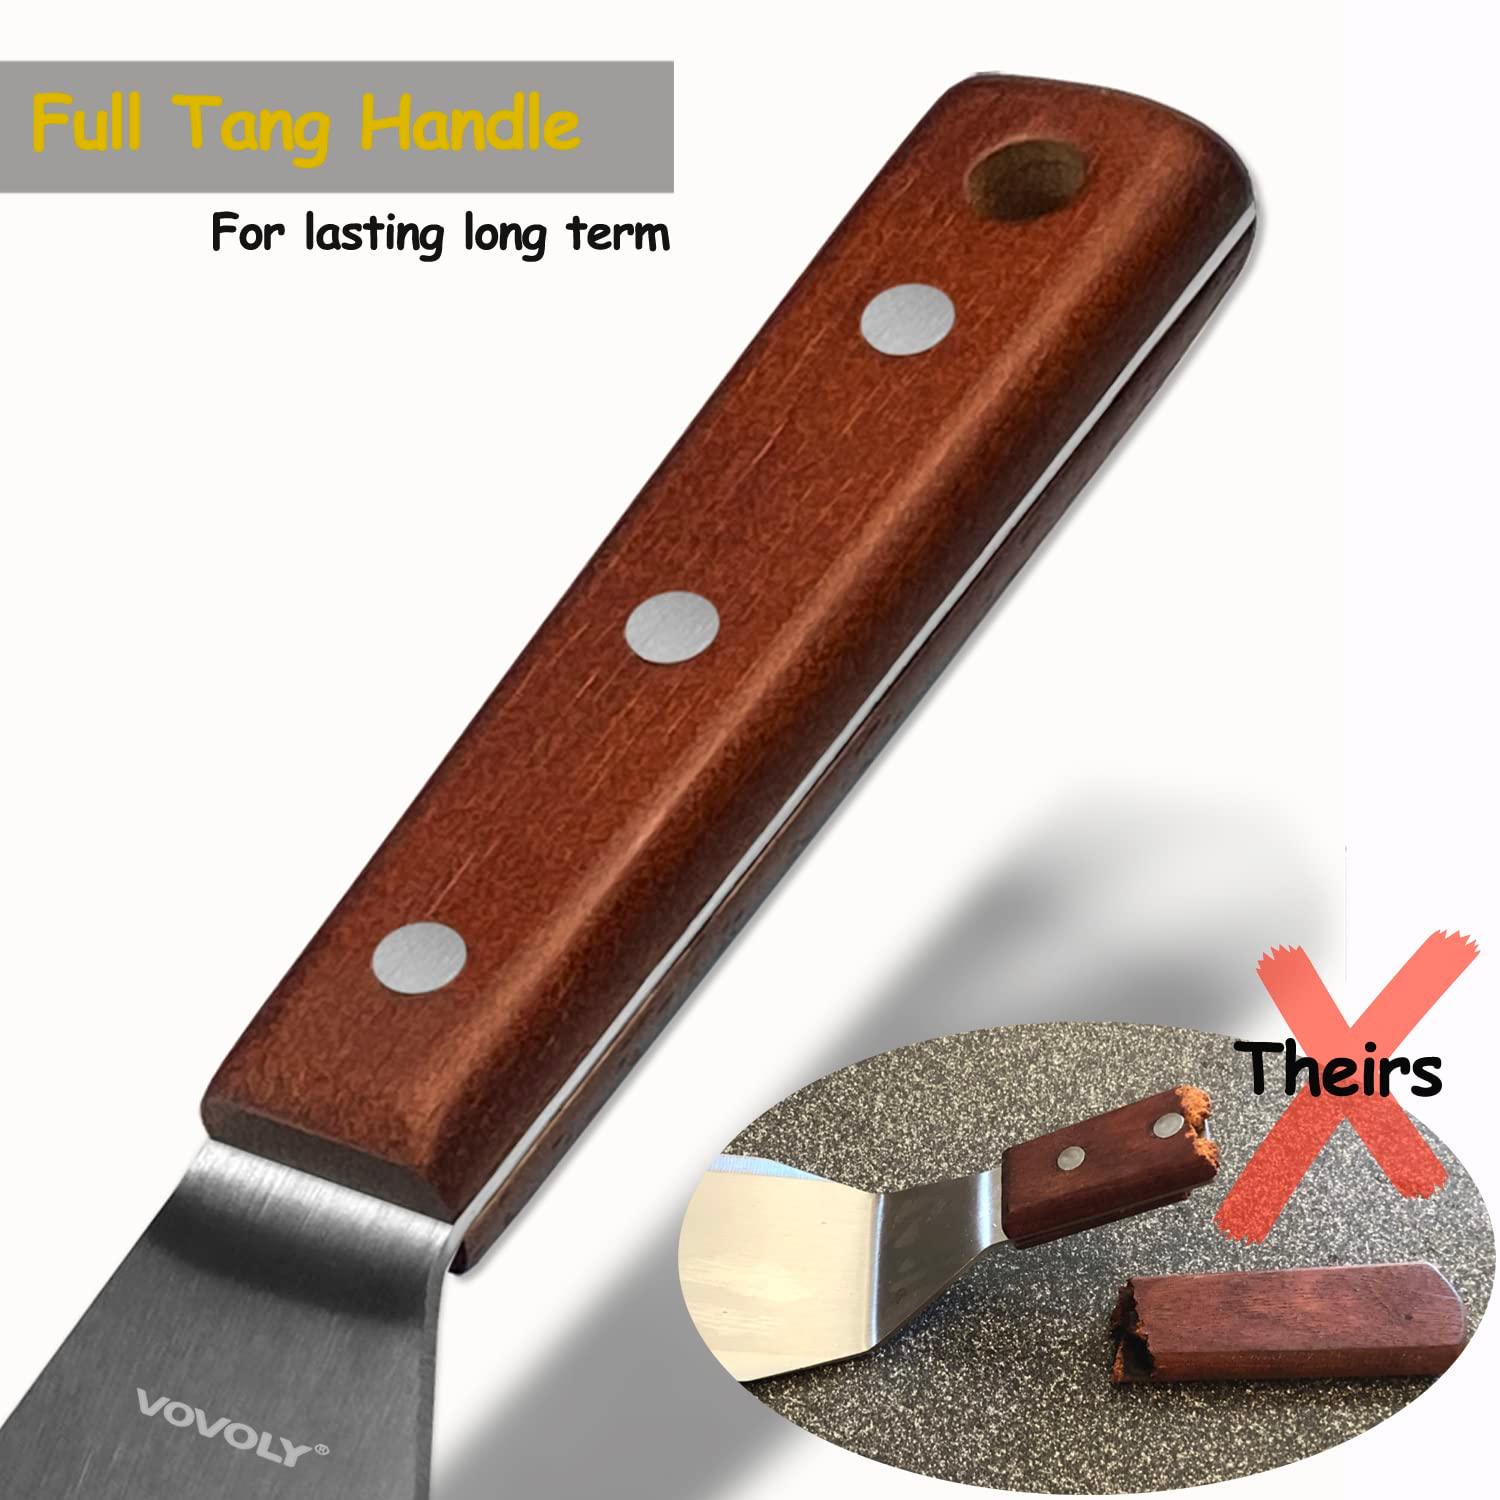 Professional Metal Spatula for Cast Iron Skillets and Flat Top Grills, Full Tang Wooden Handle,1.8mm Thick Stainless Steel Blade, Smash Burger Spatula Turner for Flipper, Cooking, BBQ, 5 Inch x 3 Inch - CookCave